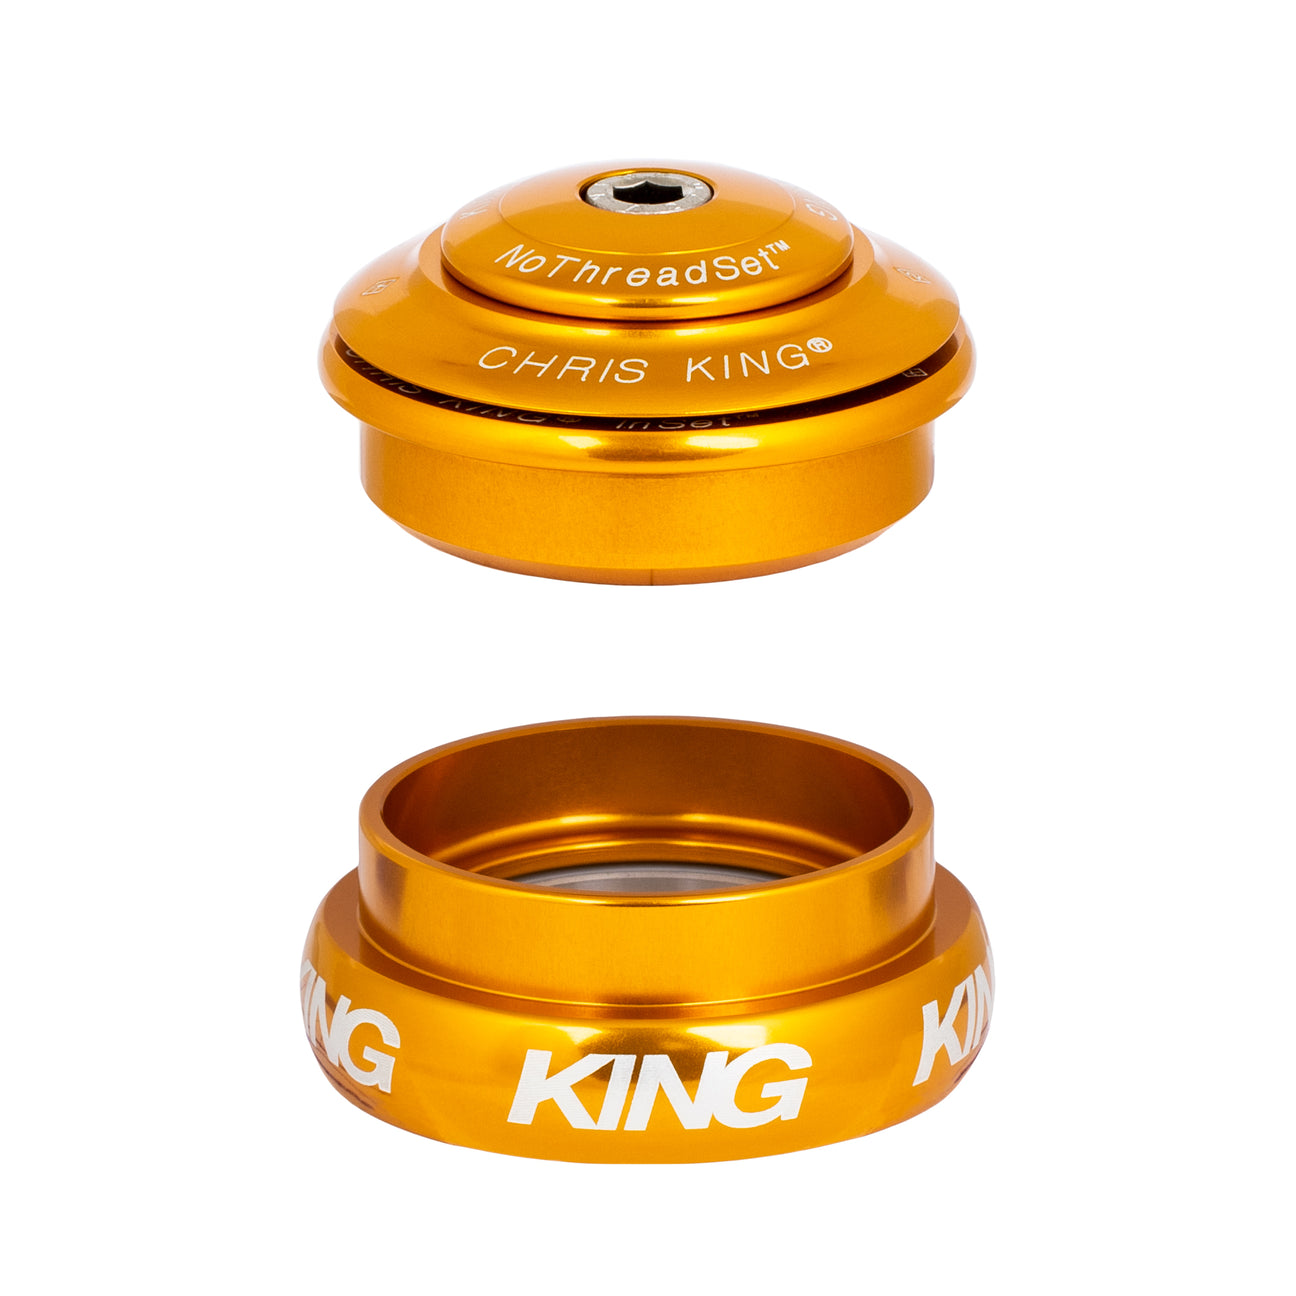 Chris King inset 8 headset in gold